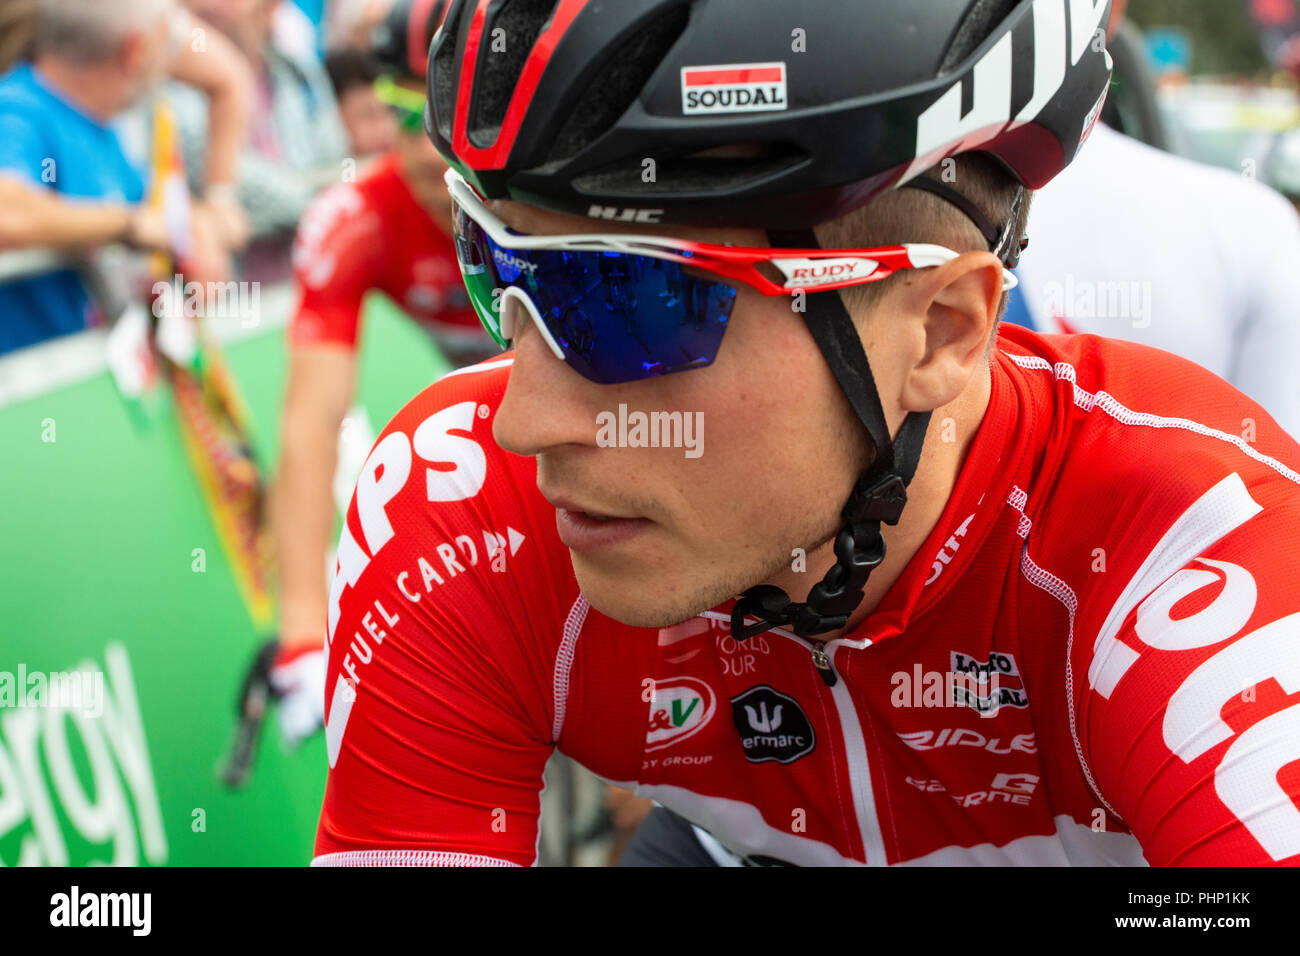 Professional cyclist Jens Keukeleire (Belgium) of the LOTTO SOUDAL team ahead of Stage 1 of the Tour of Britain cycling race starting at Pembrey Country Park. Credit: Gruffydd Thomas/Alamy Live News Stock Photo